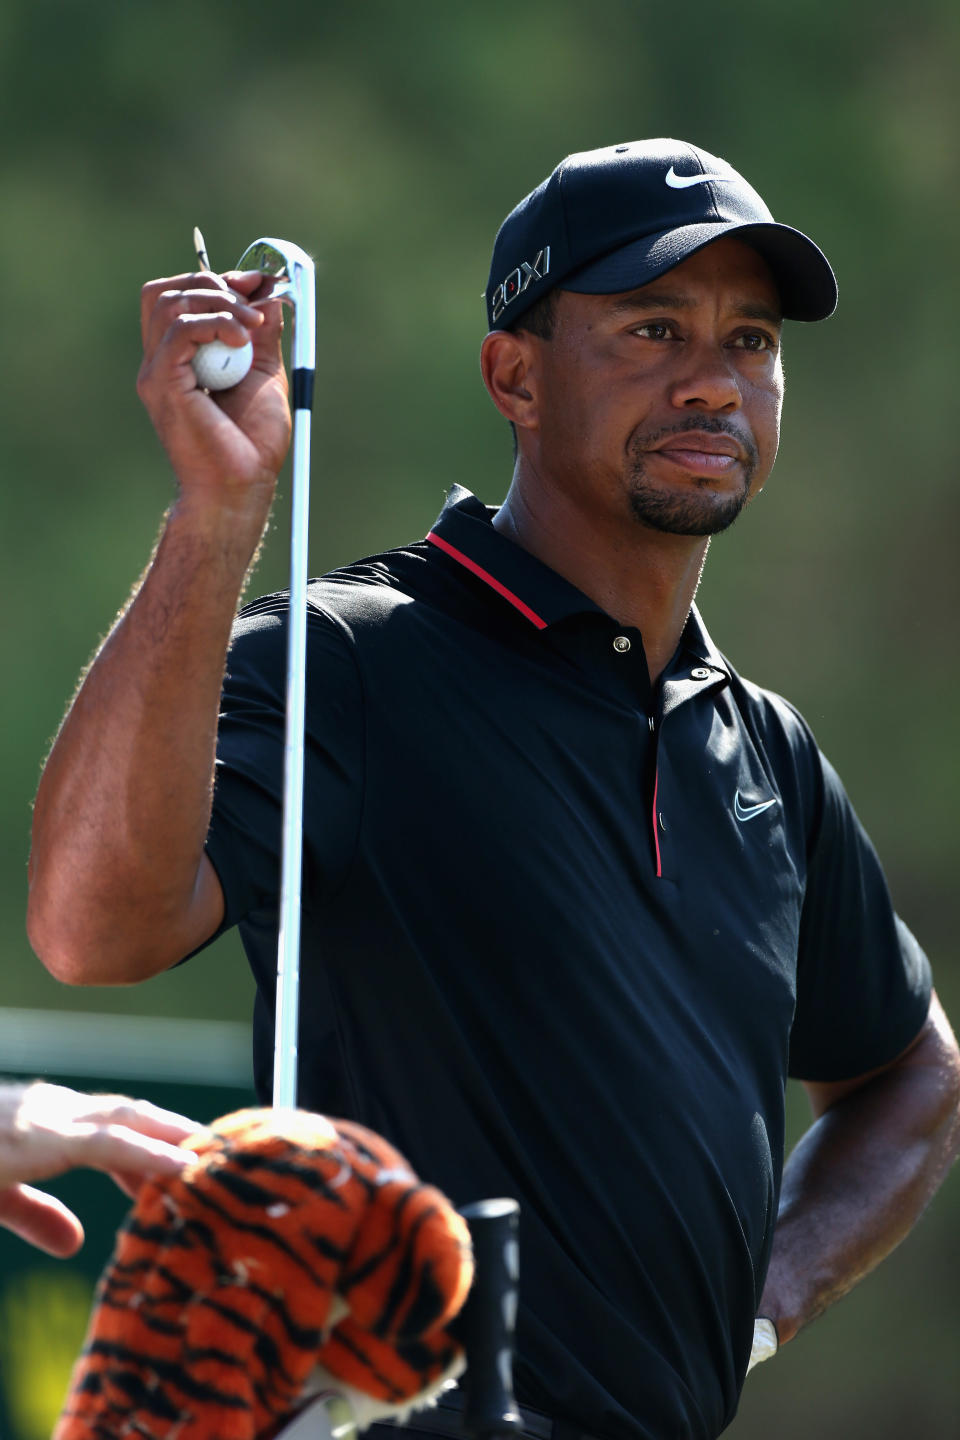 In January 2010, less than two months after <a href="http://www.foxnews.com/us/2009/11/28/tiger-woods-car-crash-came-explosive-story-claiming-affair/">reports first surfaced</a> that Tiger Woods had <a href="http://entertainment.blogs.foxnews.com/2009/12/07/tiger-woods-linked-to-10-women-cori-rist-jamie-jungers/">numerous affairs</a> while married to Elin Nordegren, the golfer <a href="http://articles.nydailynews.com/2010-01-19/gossip/17943385_1_tiger-woods-rehab-benoit-denizet-lewis">checked into Pine Grove Behavioral Health and Addiction Services</a> in Hattiesburg, Miss. to treat the sex addiction that he claimed destroyed his marriage.  In February of that year, he <a href="http://nymag.com/daily/intel/2010/02/tiger_woods_i_was_unfaithful_i.html">issued a televised apology</a> stating: "The issue involved here was my repeated irresponsible behavior. I was unfaithful. I had affairs. I cheated. What I did is not acceptable. And I am the only person to blame."    Woods and Nordegren, who <a href="http://www.people.com/people/article/0,,710377,00.html">wed in Barbados</a> in 2004, <a href="http://www.people.com/people/article/0,,20414961,00.html">finalized their divorce</a> in August 2010. 